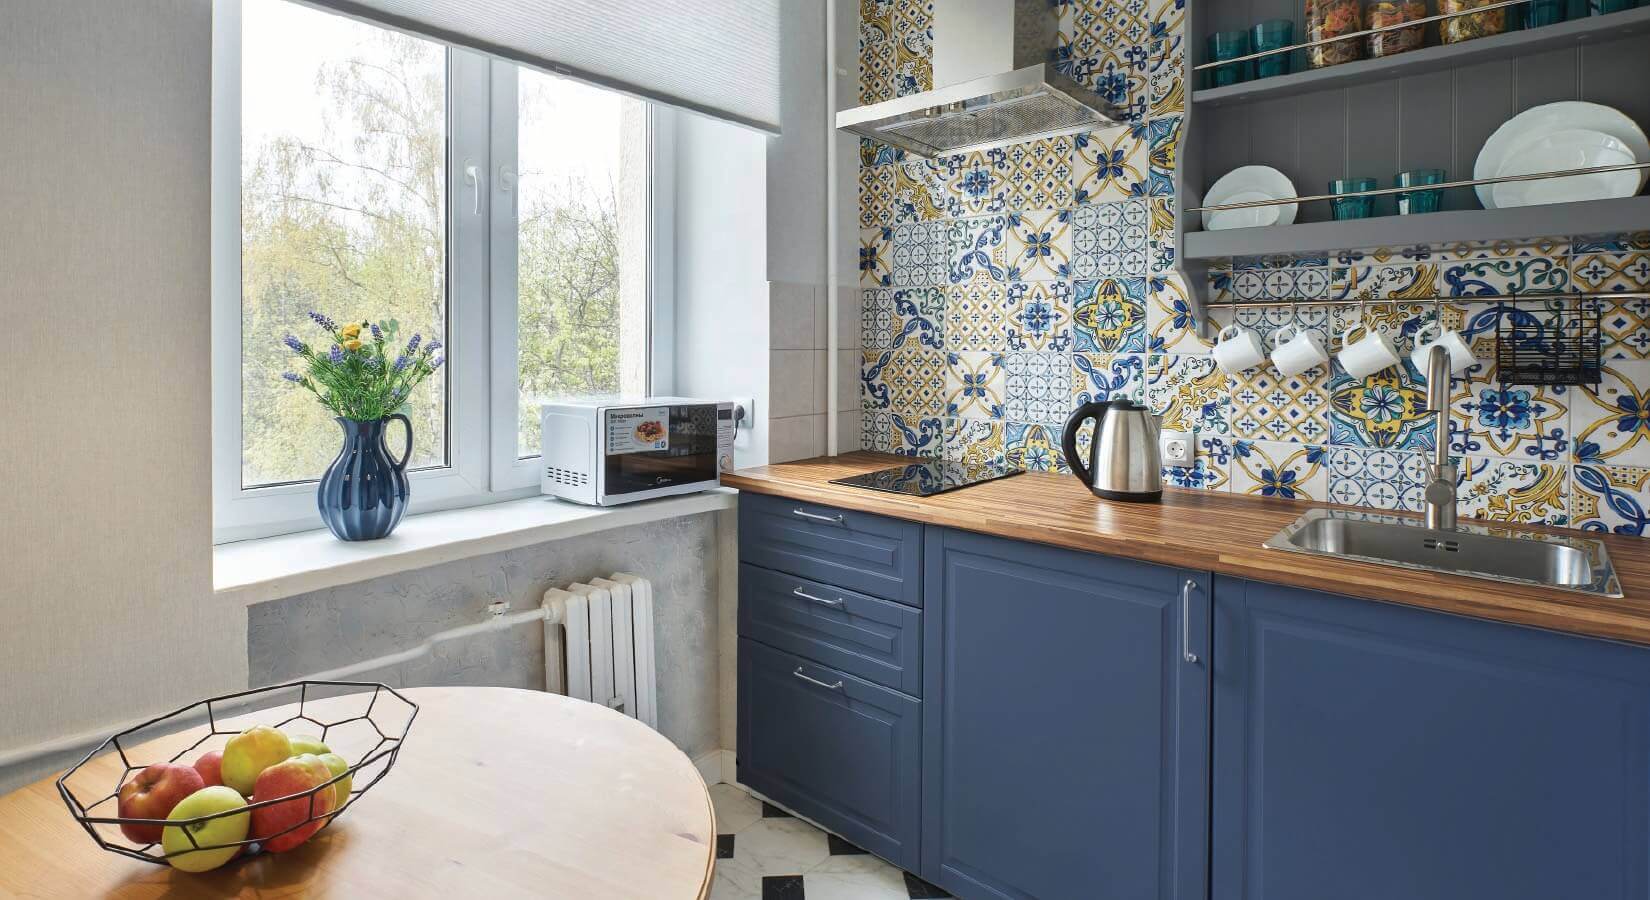 Small kitchen with navy blue cabinets, butcher block countertops, and yellow and blue Moroccan patterned backsplash.